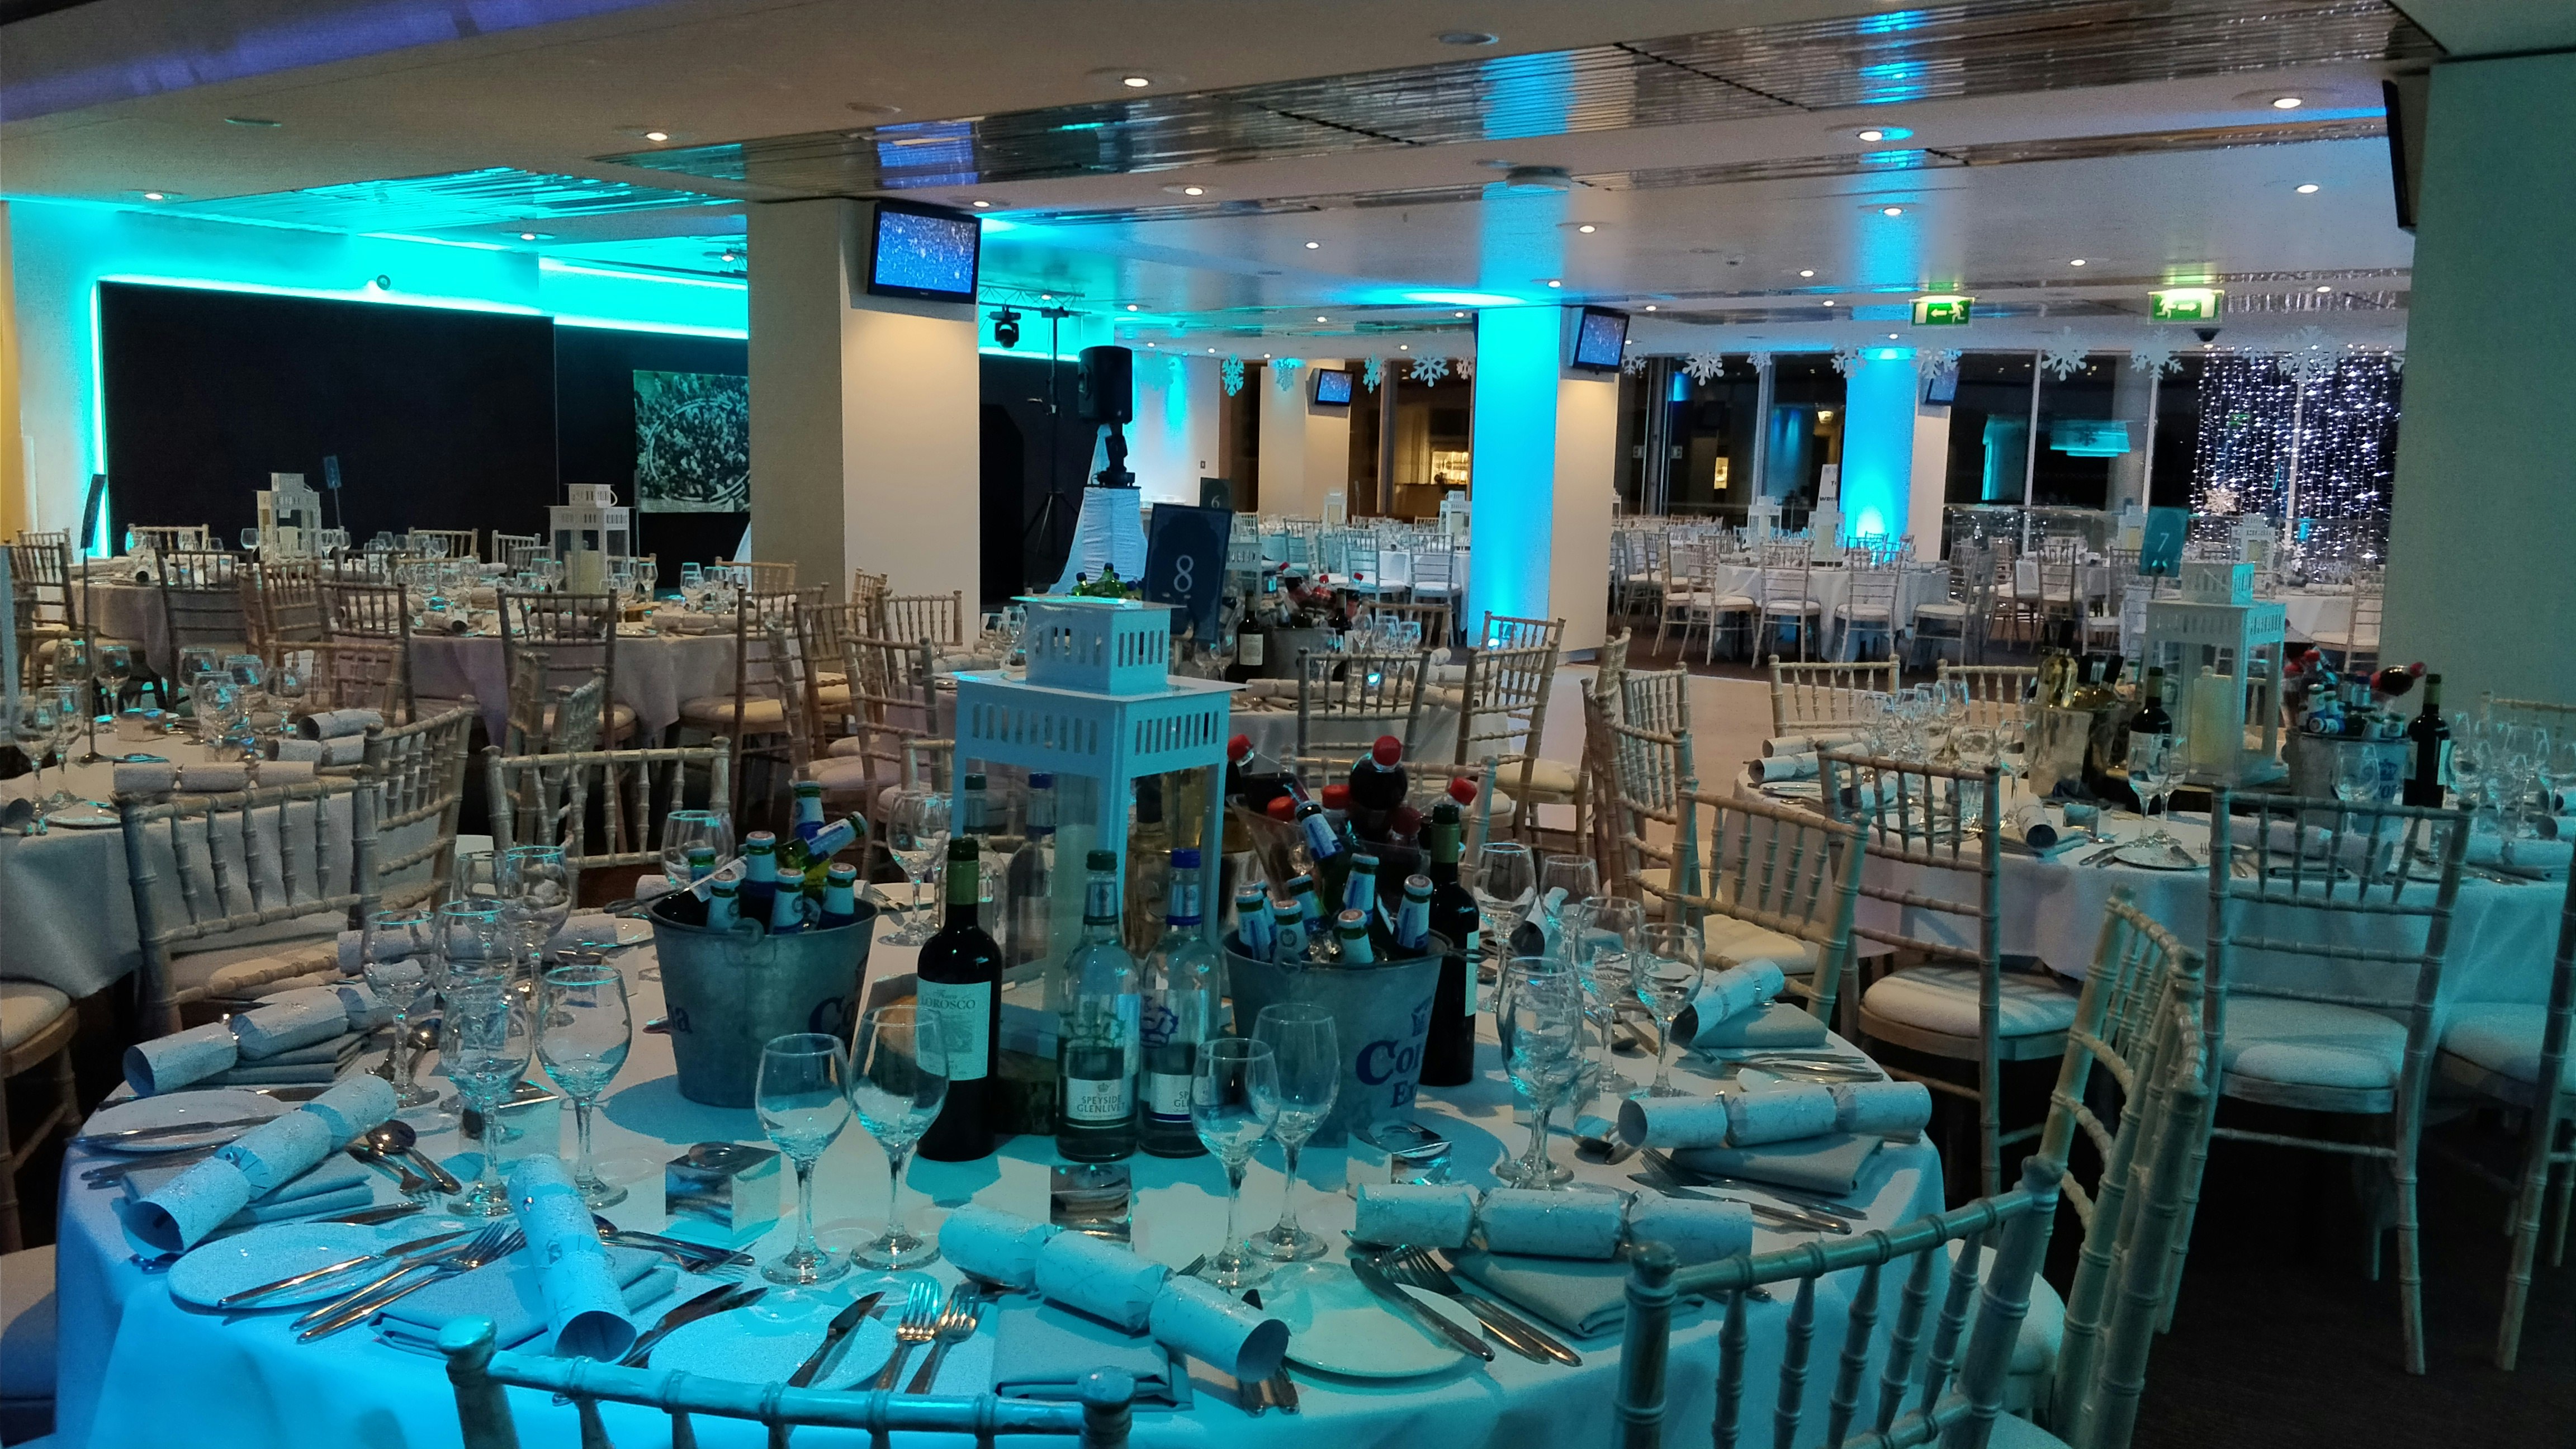 Epsom Downs Racecourse - Blue Riband Room image 4